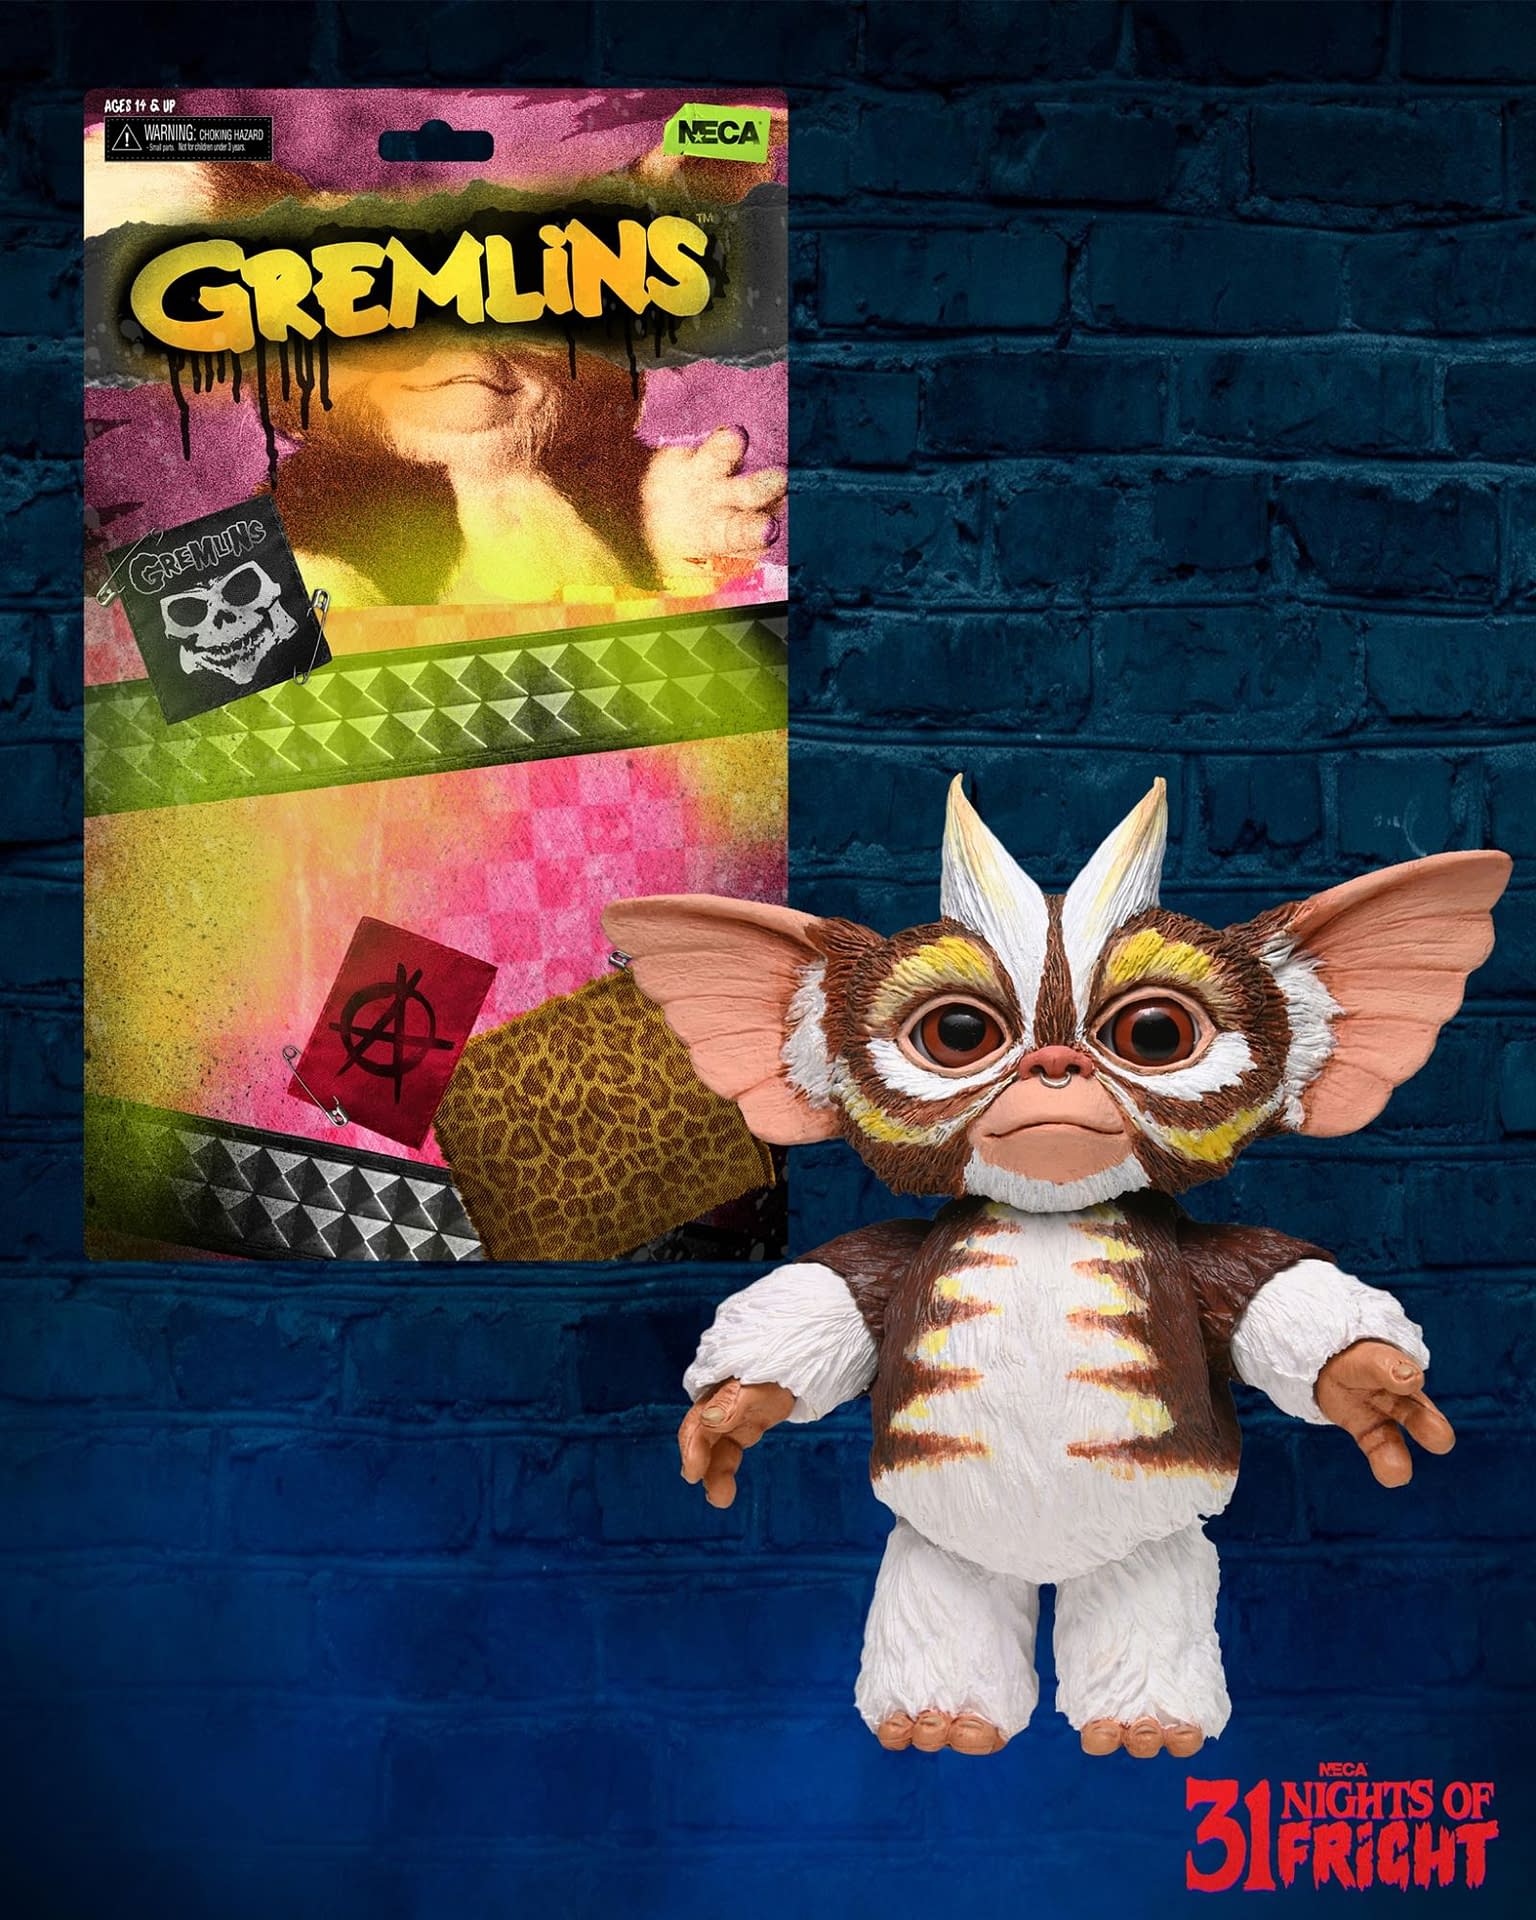 NECA 31 Nights Of Fright Round-Up: Wolfman, Gizmo, & More